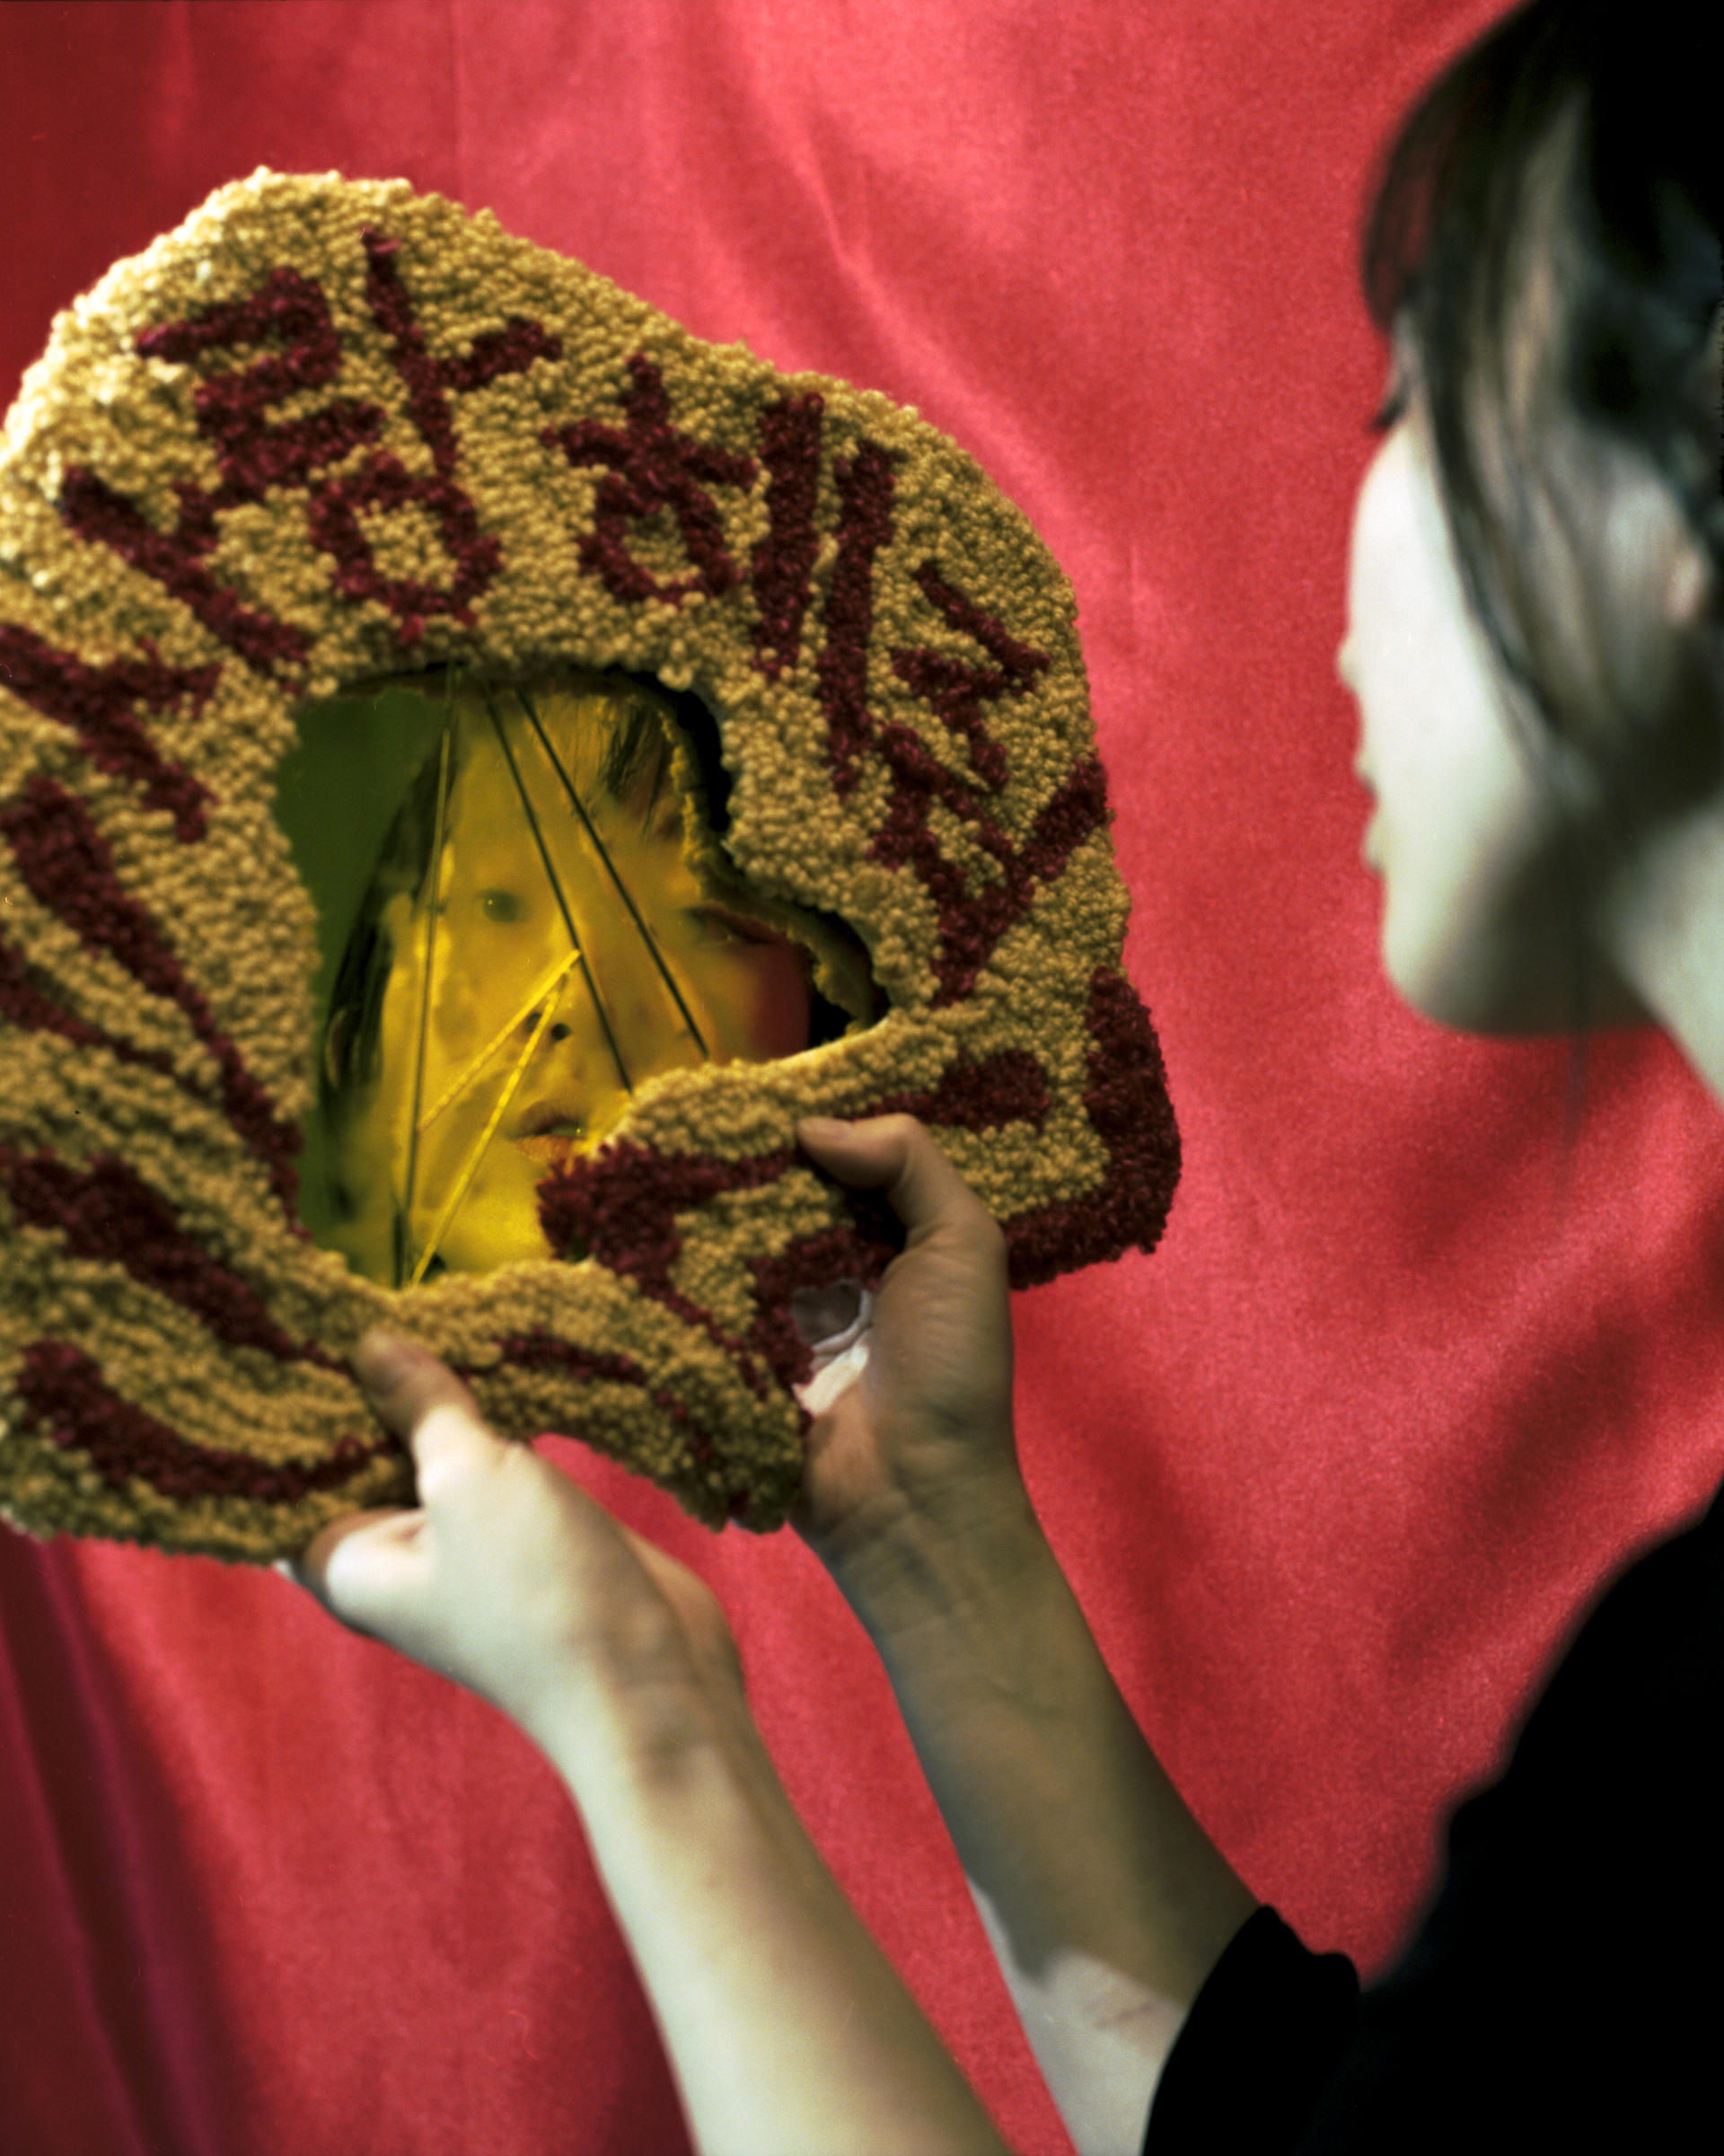 An asian woman looking into a fractured mirror covered with a tufted frame displaying the words "Love Me" in Korean.